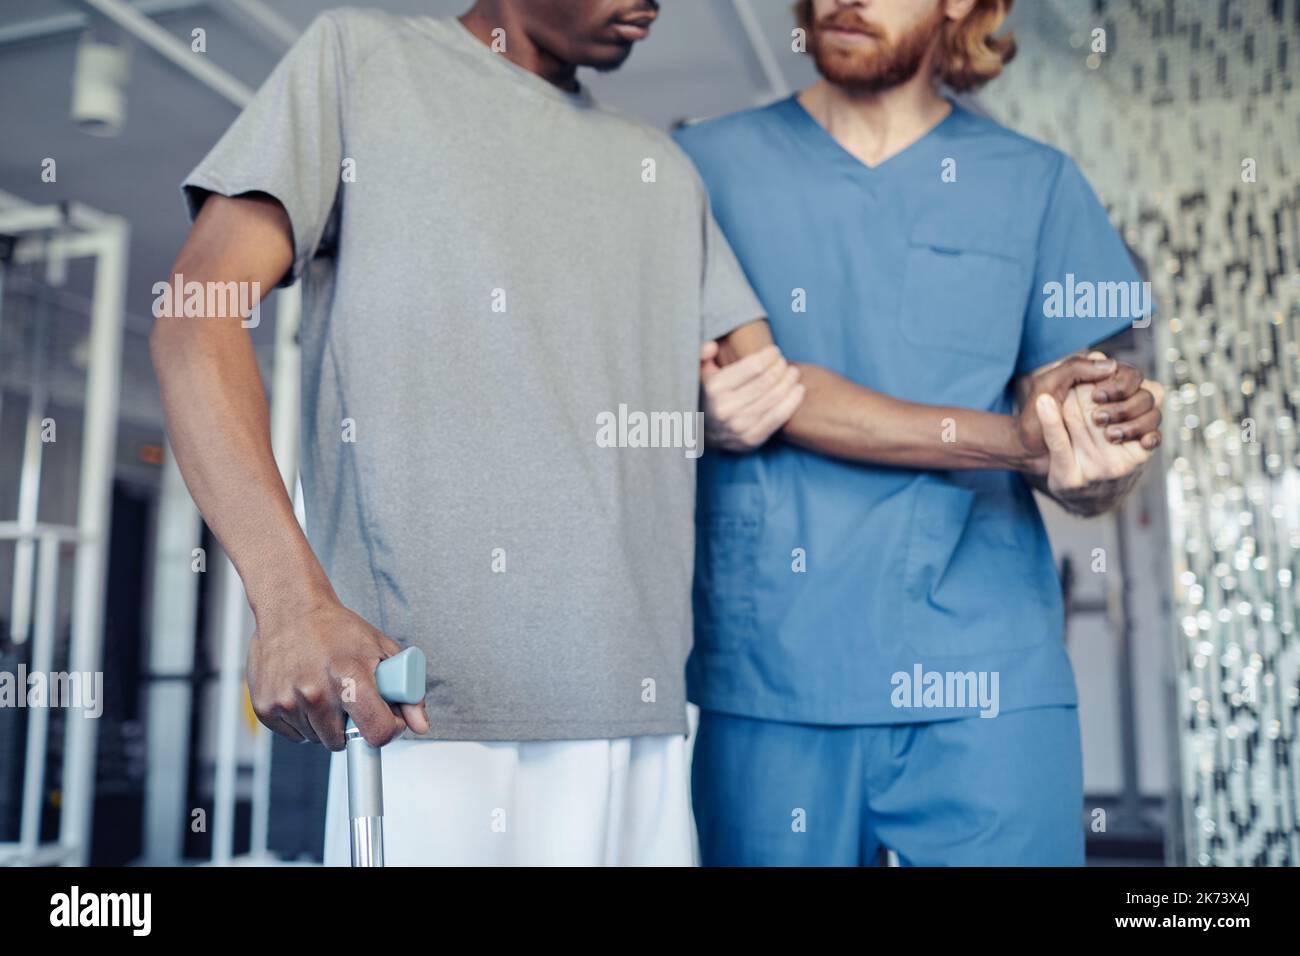 Close-up of doctor in uniform holding hand of patient and helping him to walk during rehabilitation in gym Stock Photo